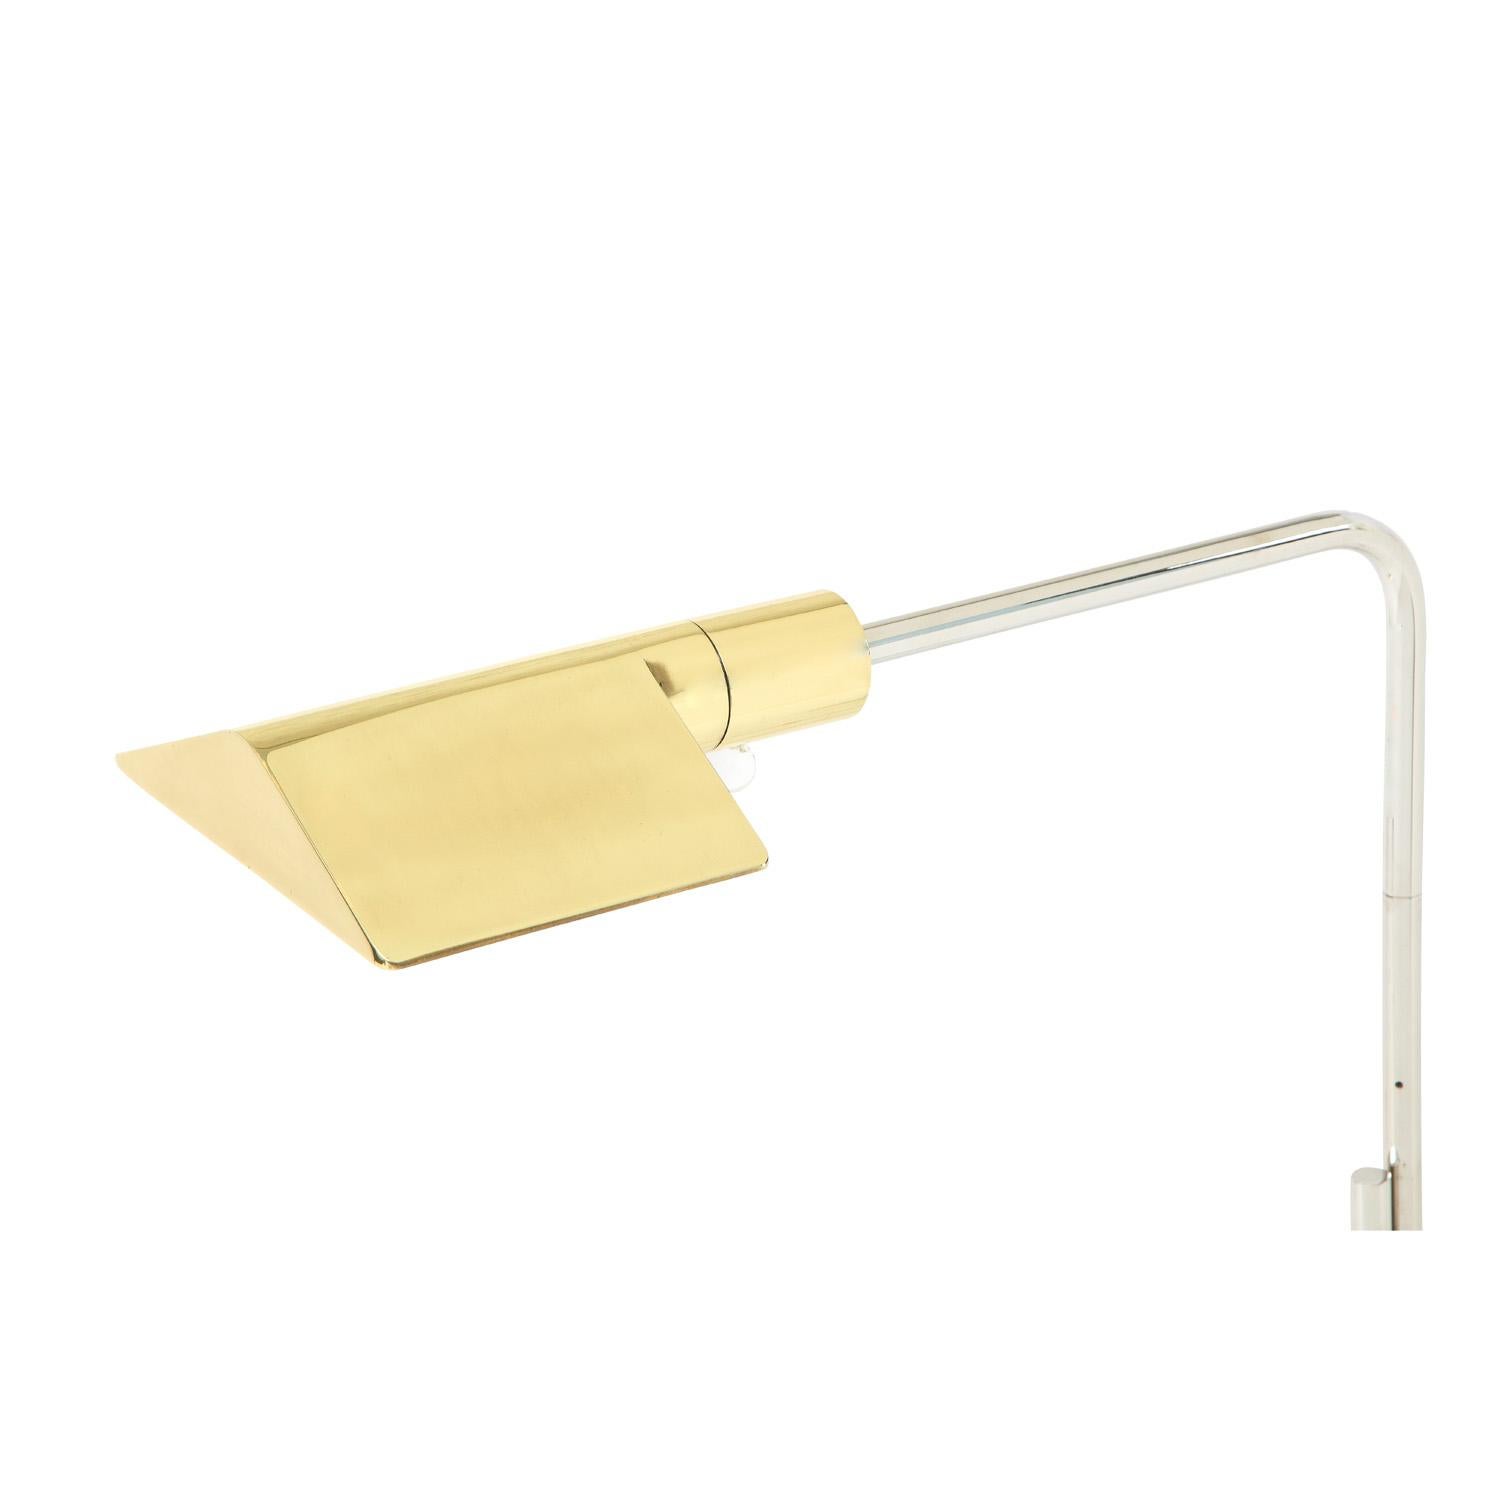 Hand-Crafted Cedric Hartman Reading Lamp in Chrome and Brass 1980s 'Signed'